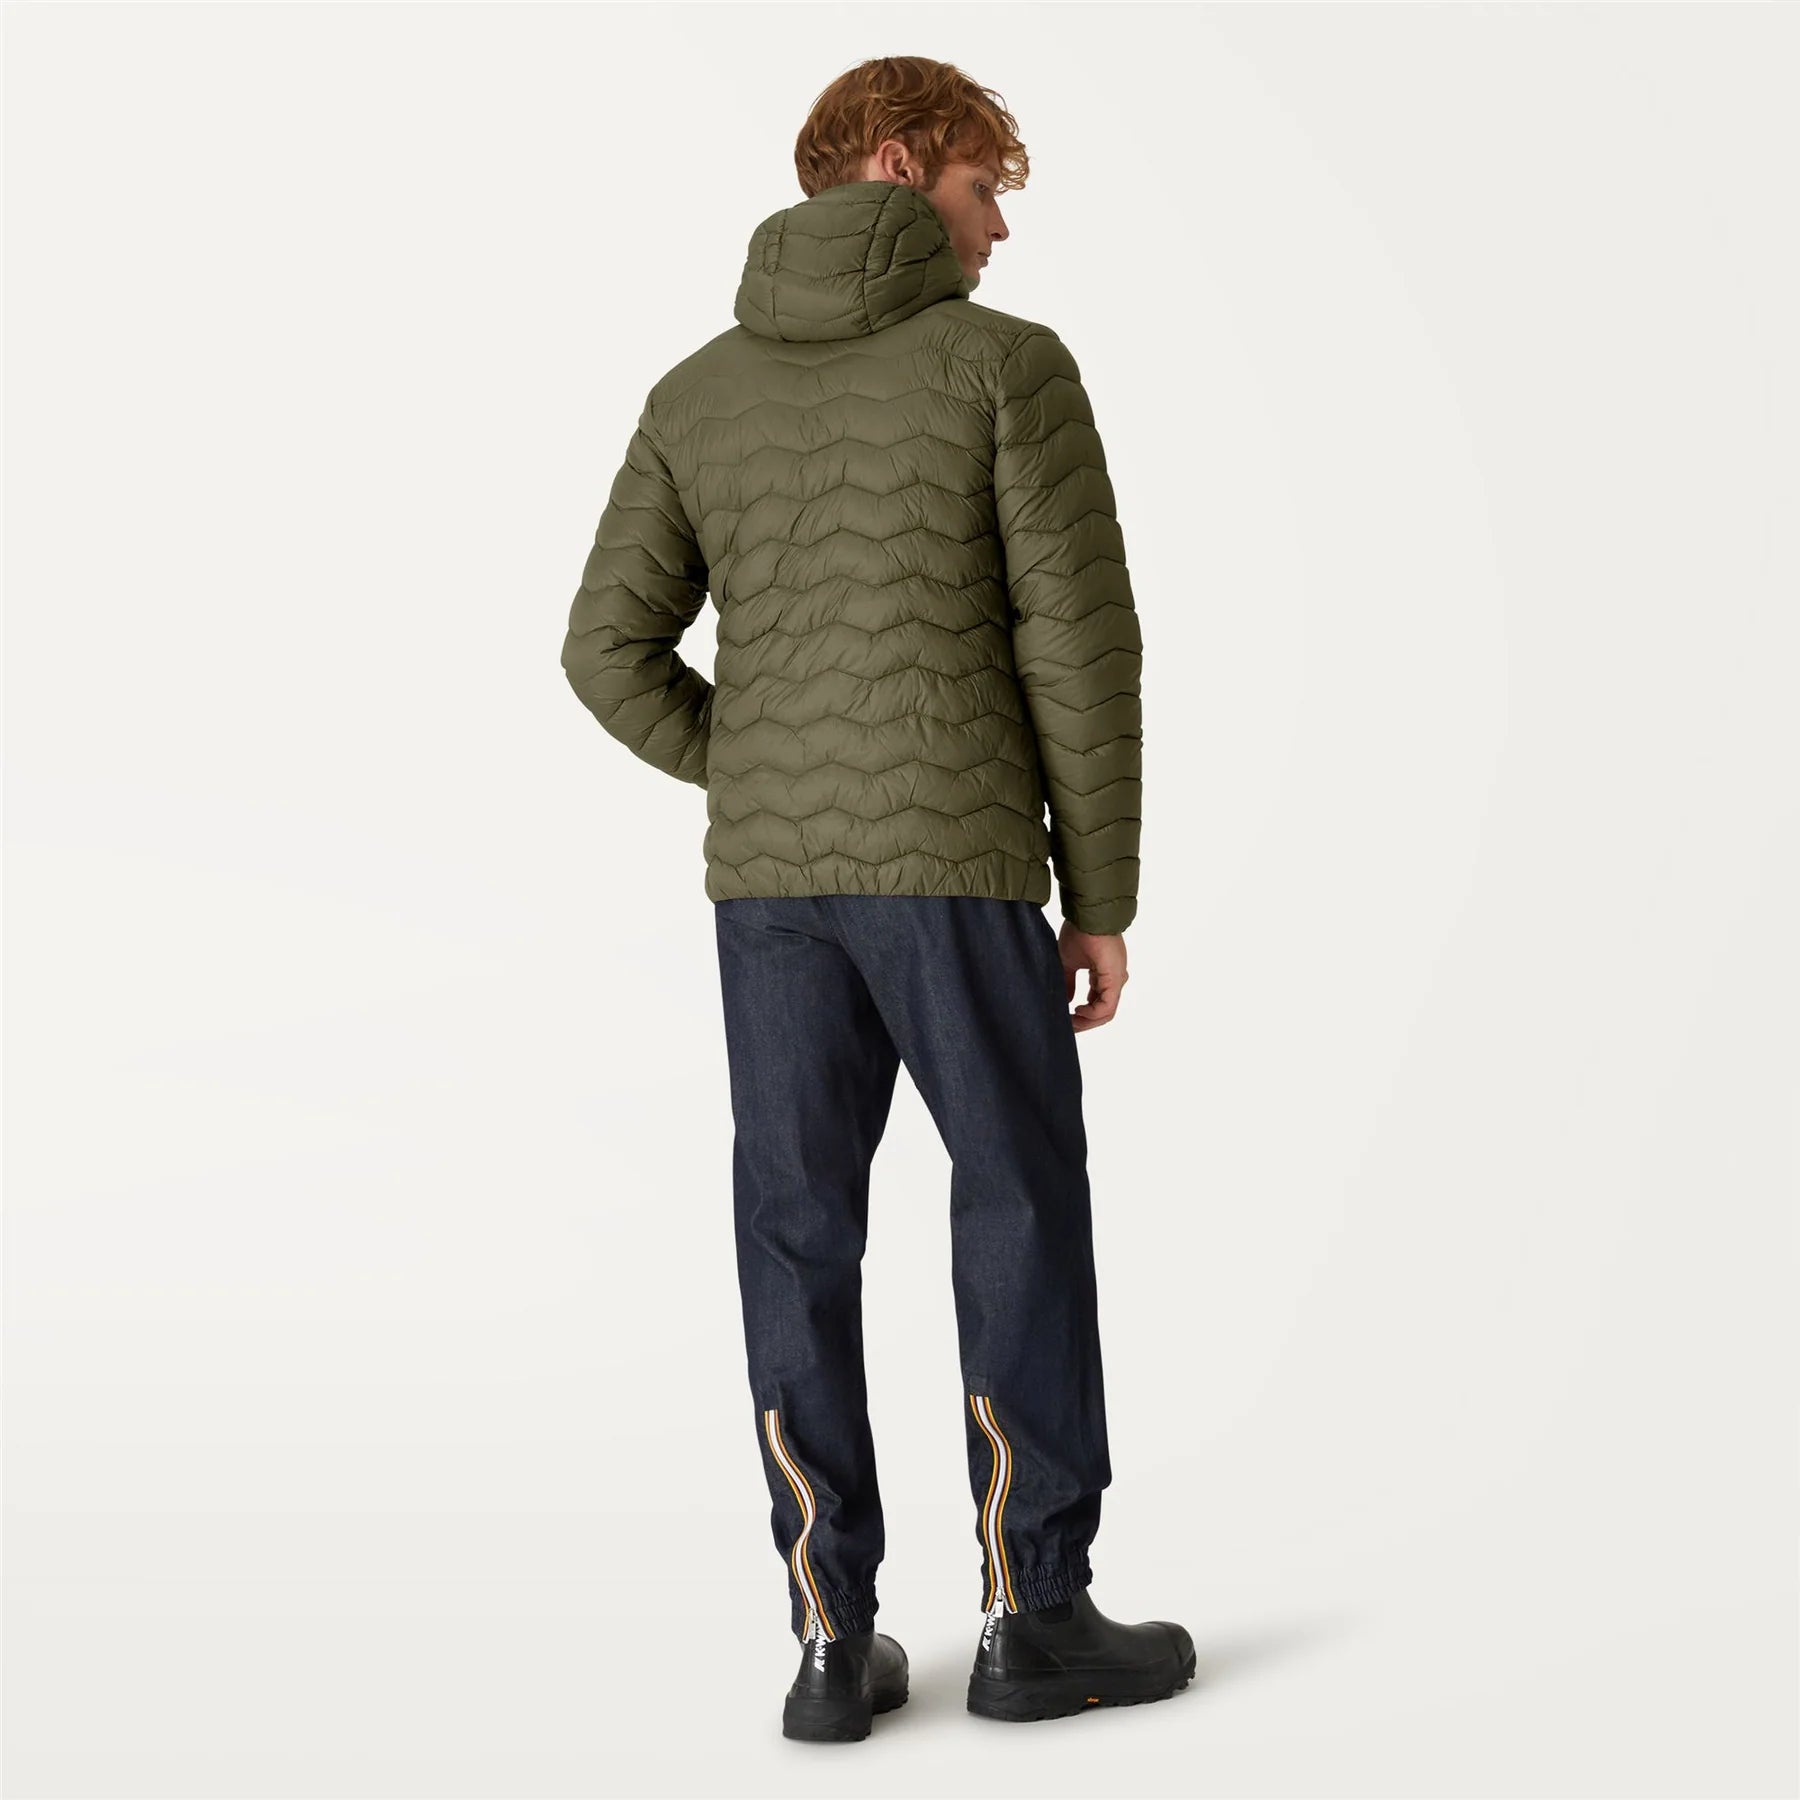 Jack Warm - Men's Quilted Packable Puffer Jacket in Green Blackish